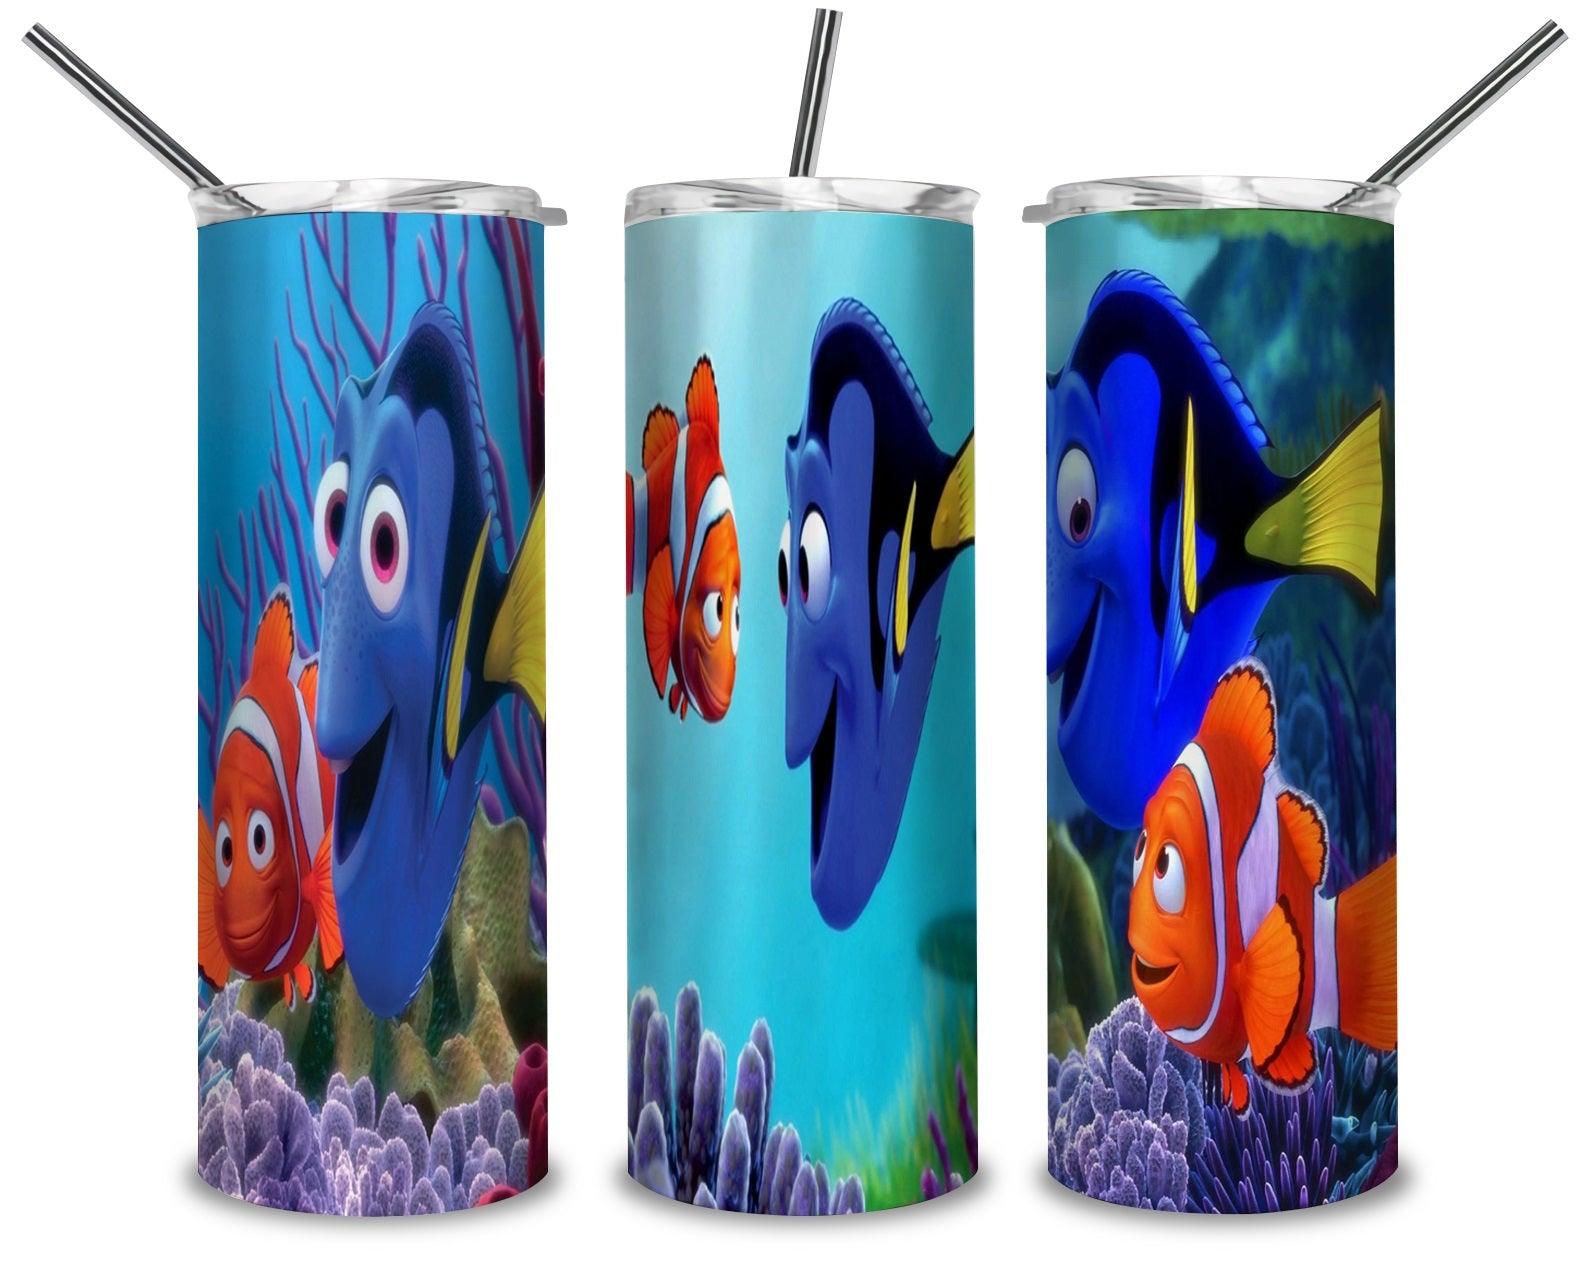 Nemo And Dory PNG, Colorful Fish 20oz Skinny Tumbler Designs PNG, Sublimation Designs PNG - TheDigitalSVG